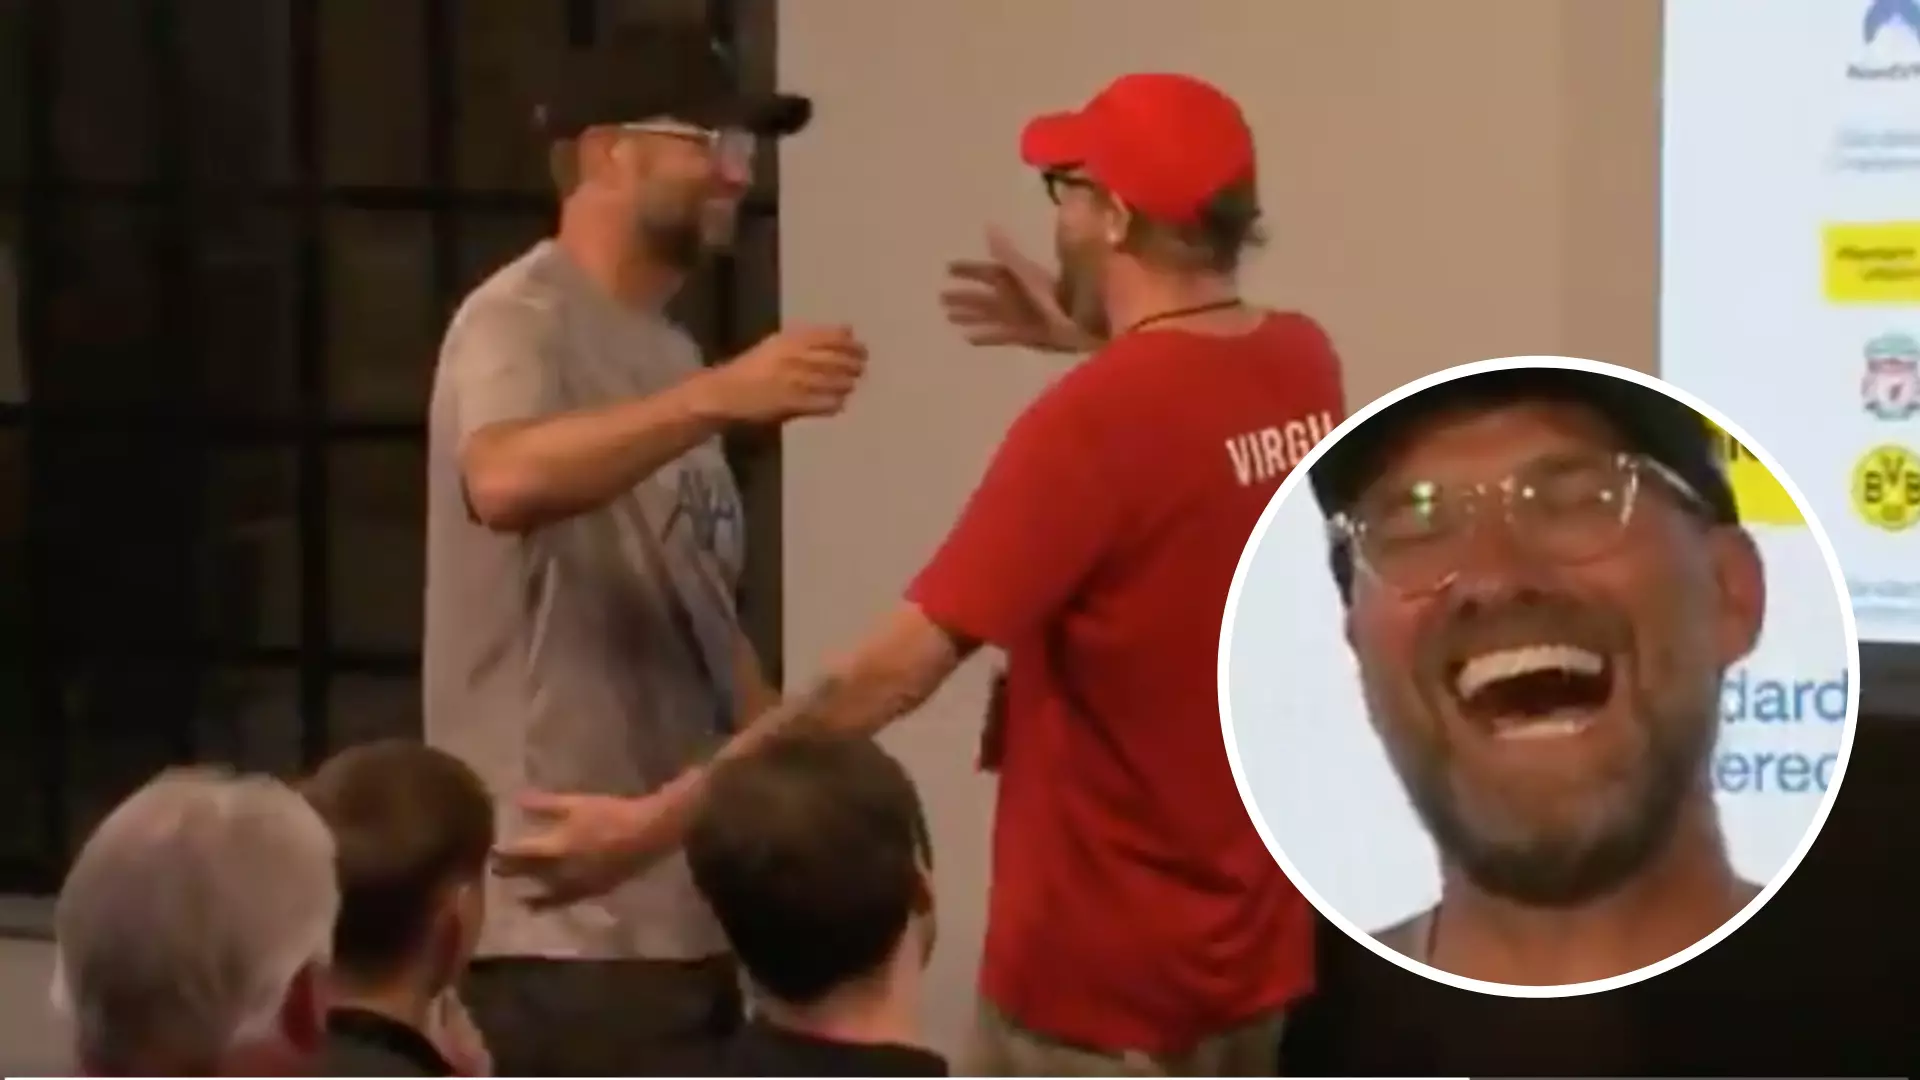 Jurgen Klopp Hugs Journalist Who Dressed Up As His Doppelganger In Post-Match Conference